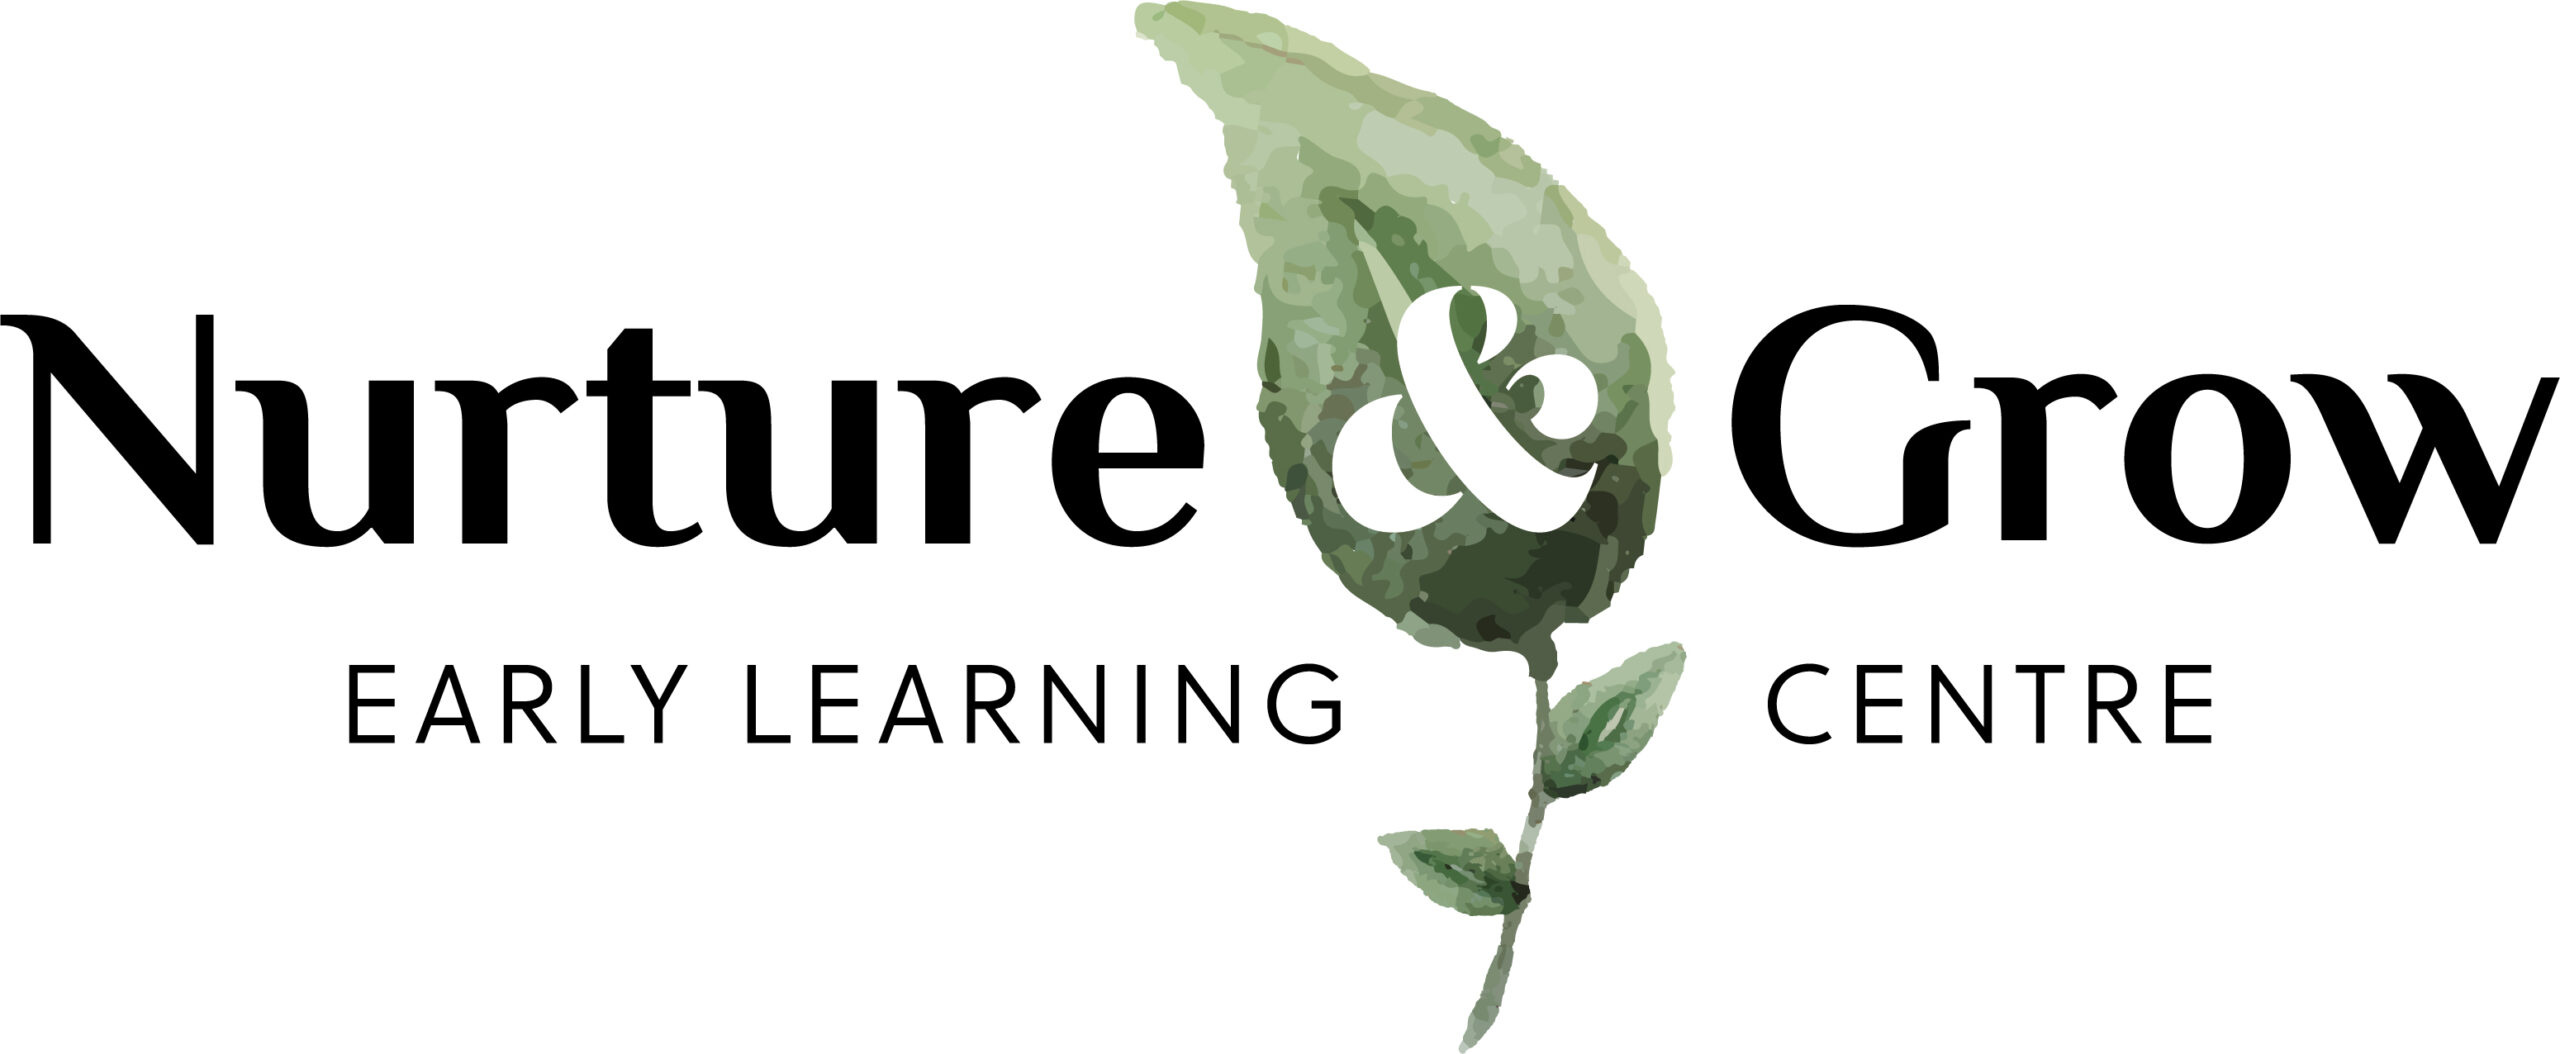 Nurture & Grow Early Learning Centre